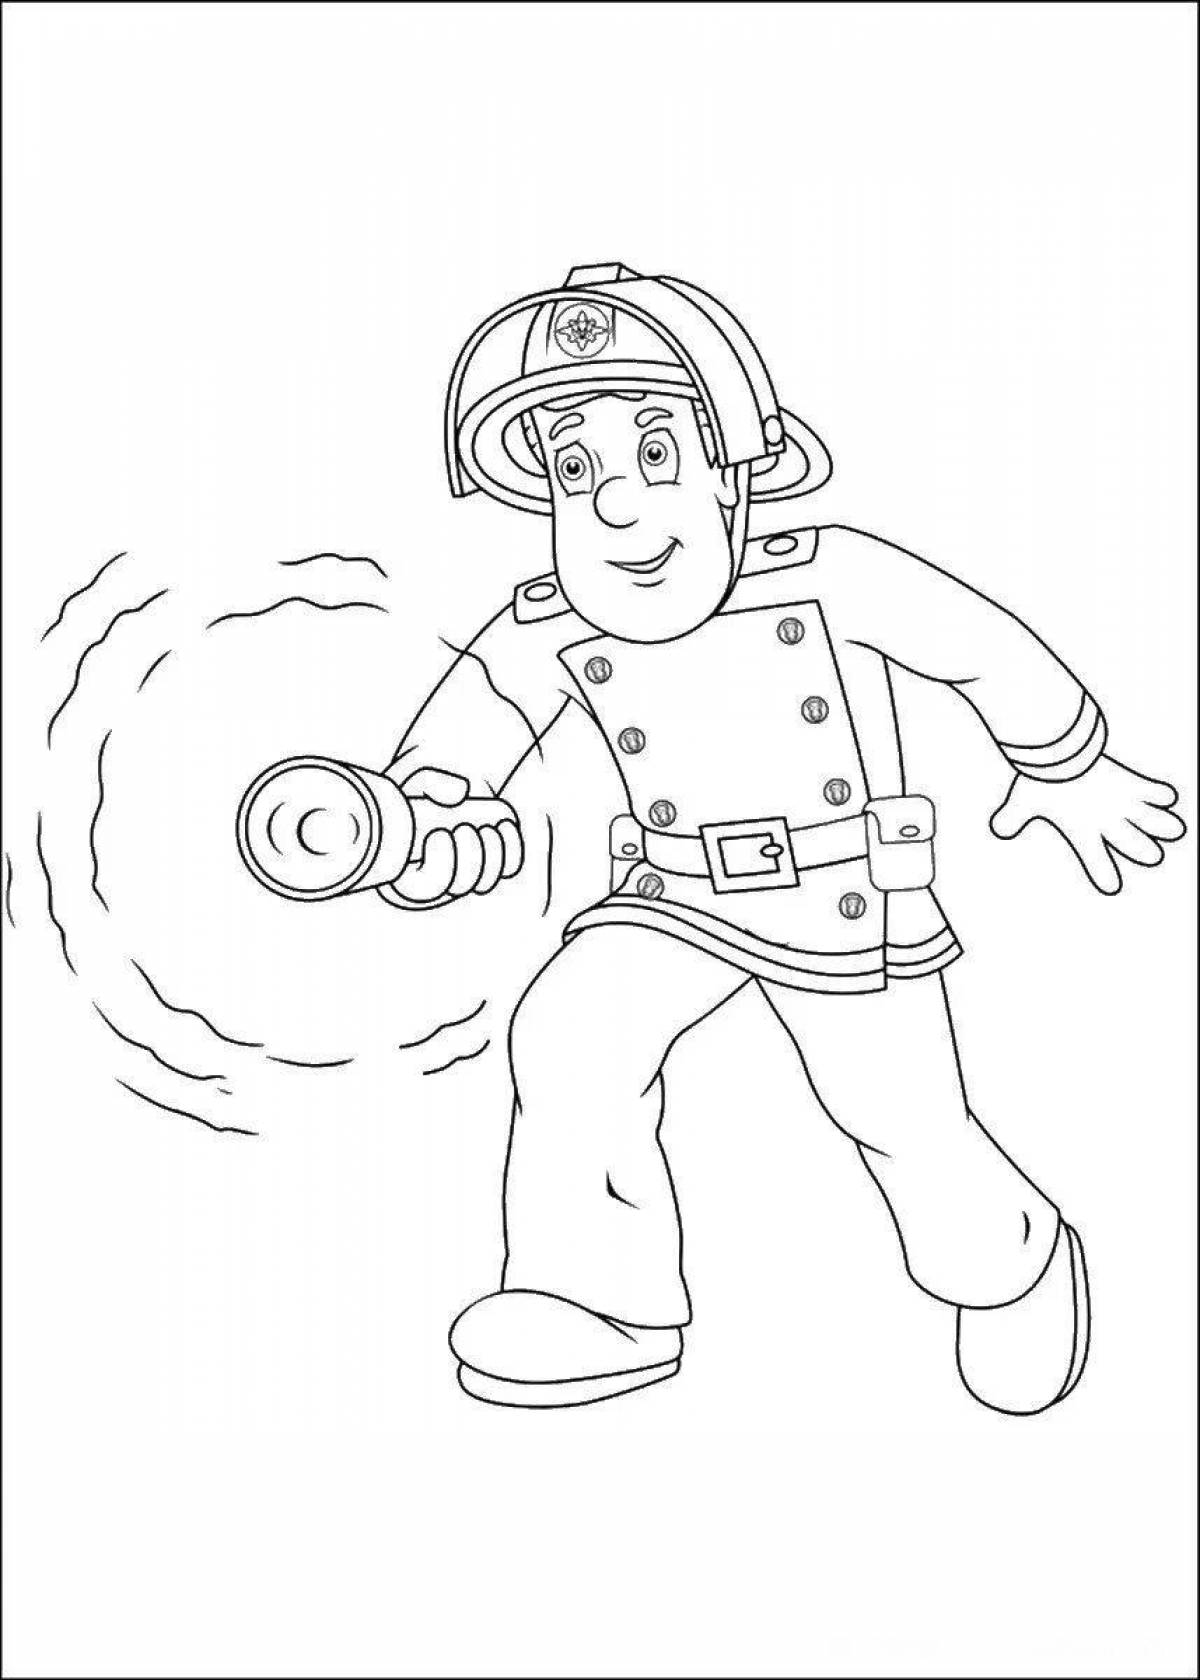 Colourful lifeguards coloring page